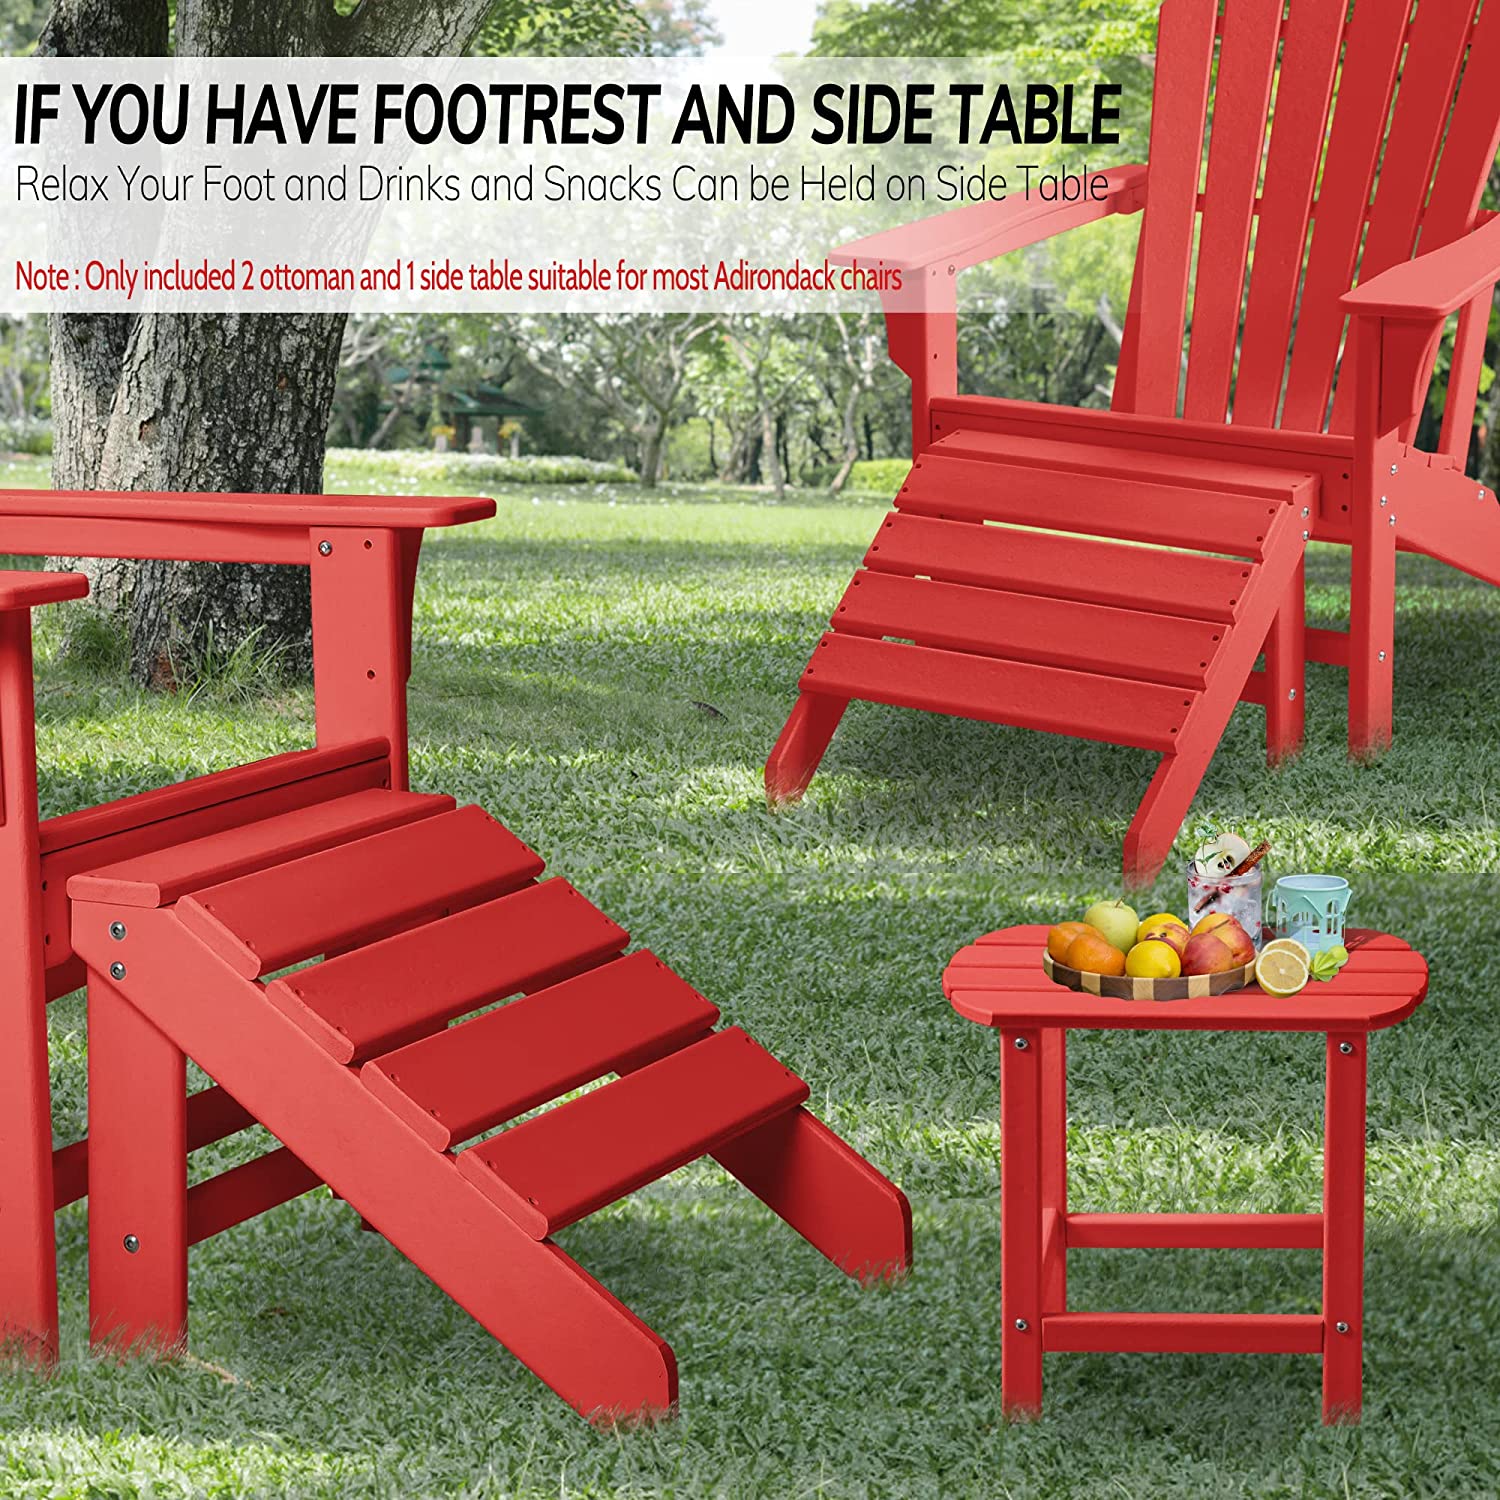 FHFO Adirondack Ottoman and Side Table for Adirondack Chairs, 2 Pieces Outdoor Adirondack Footrest & 1 Piece End Table, Weather Resistant Footstool Table for Adirondack Chair （Red） - image 4 of 5